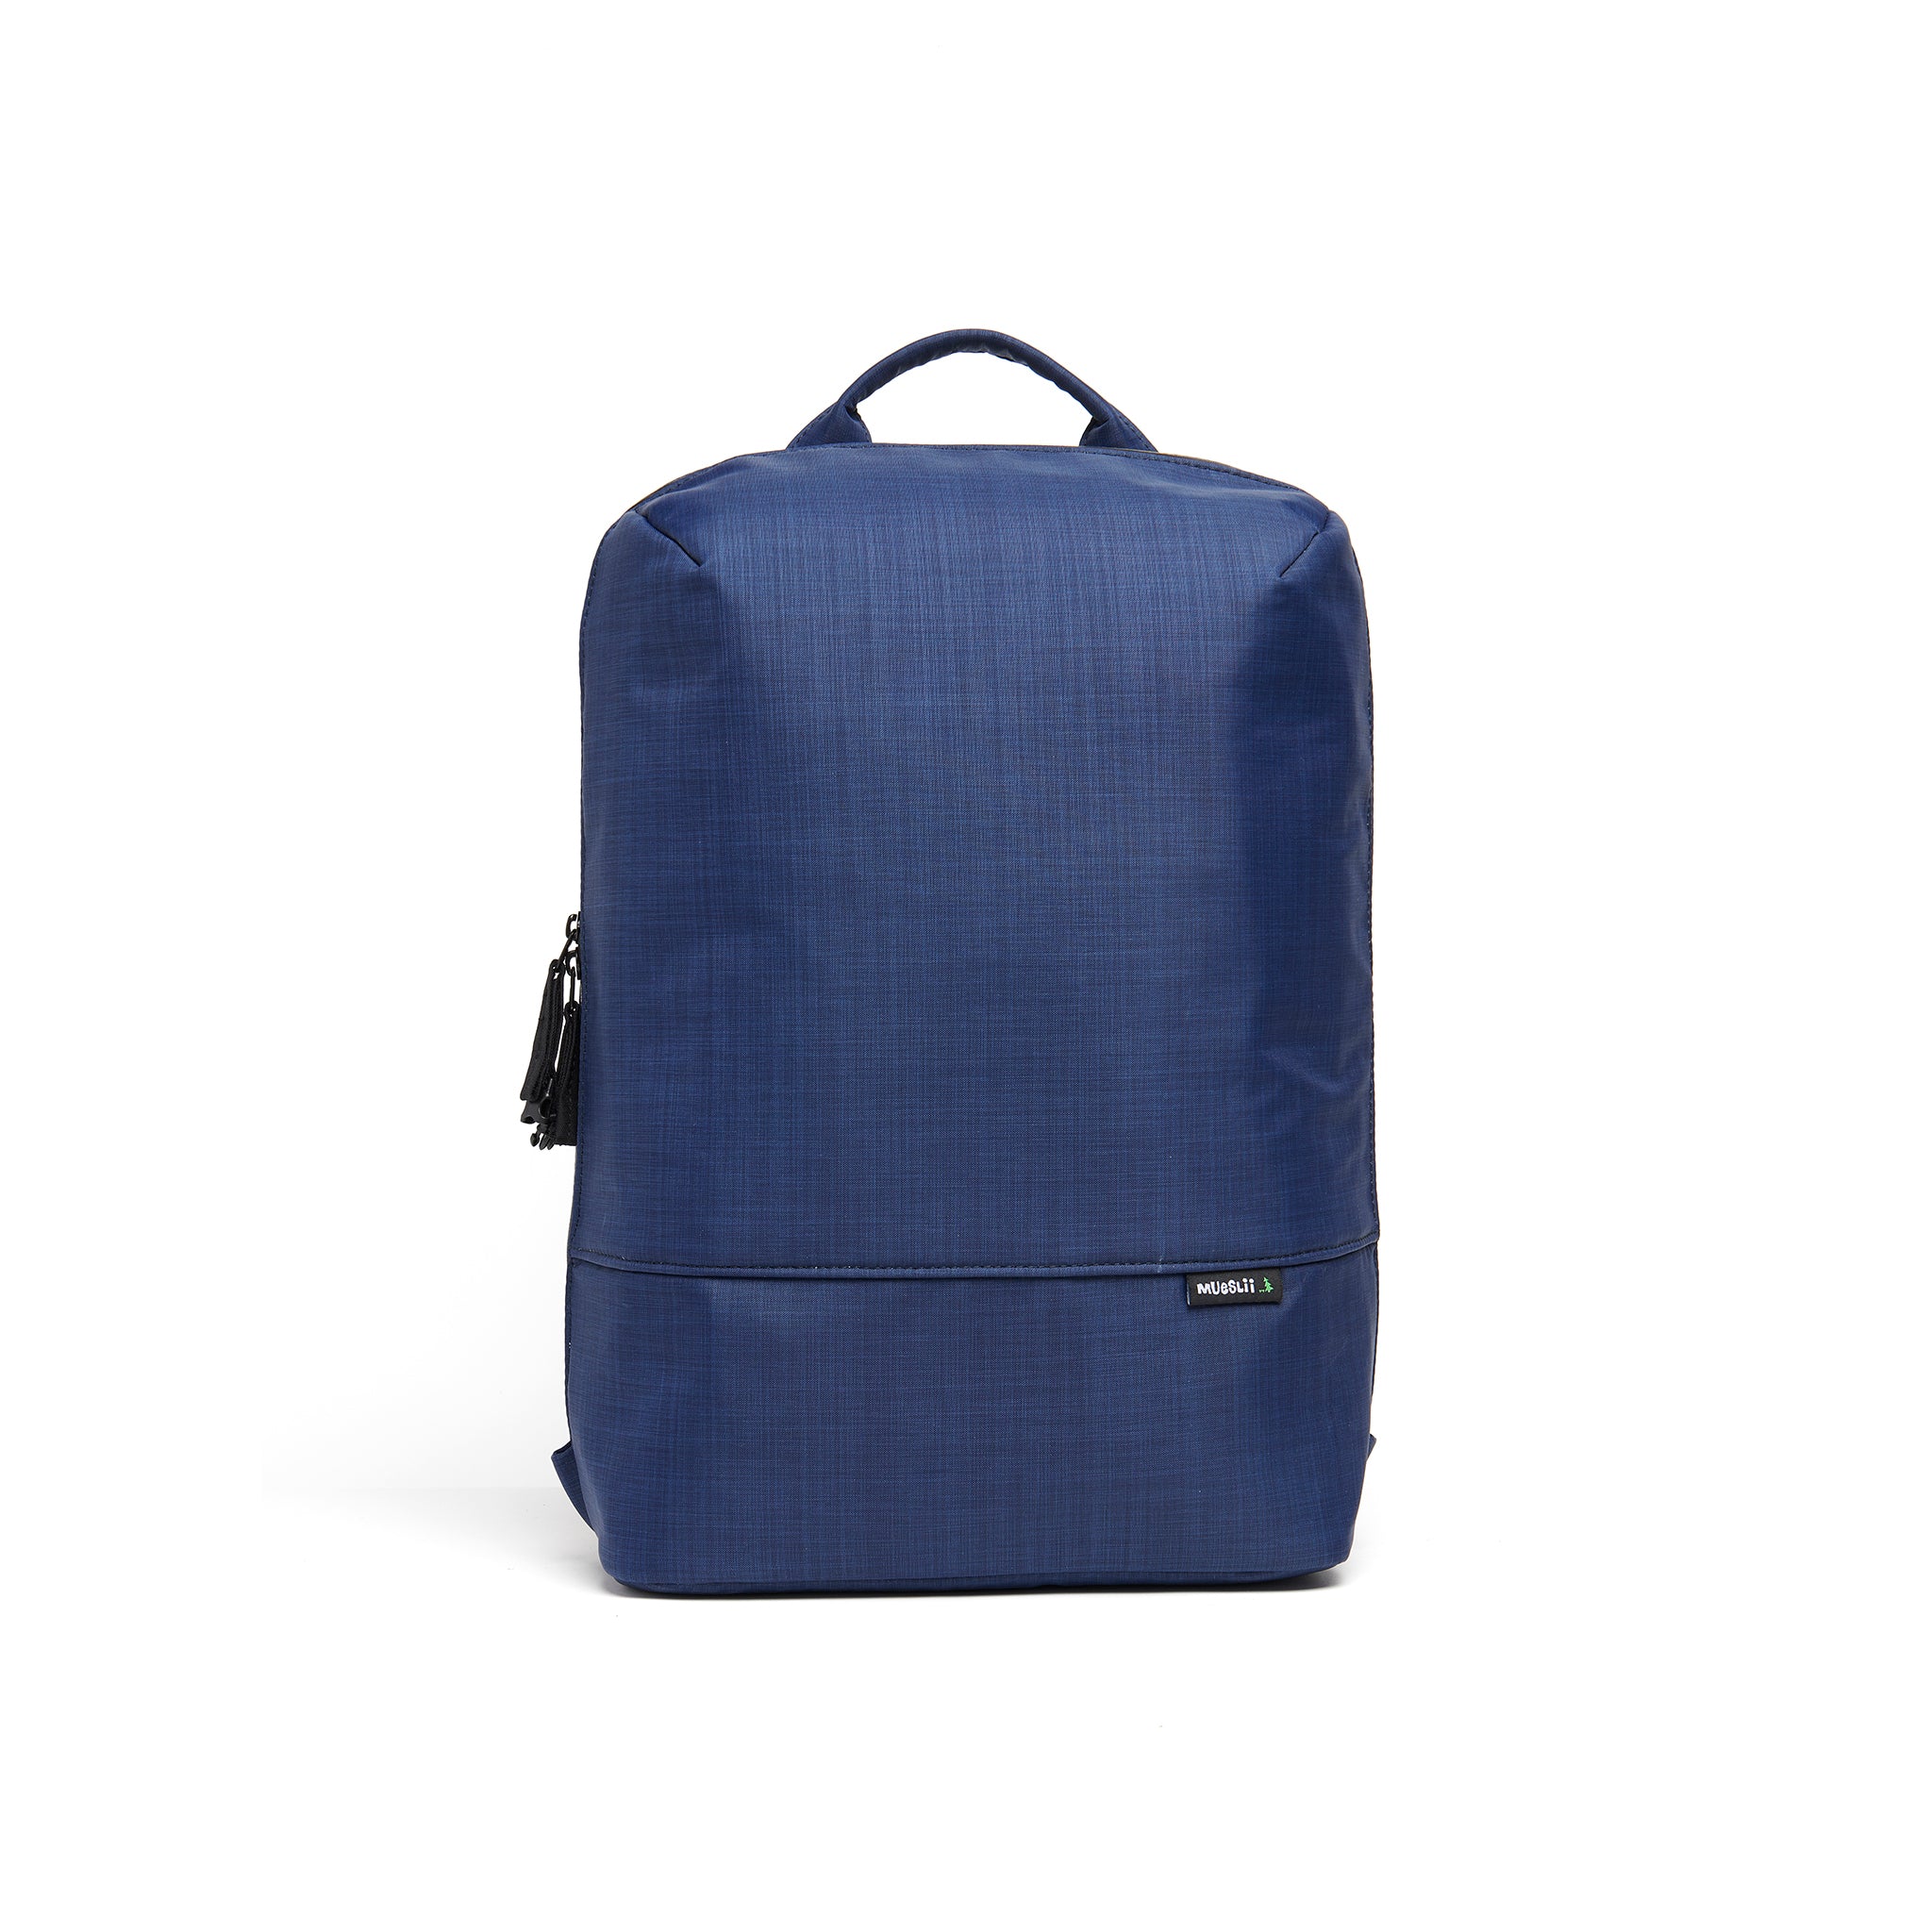 Mueslii daily backpack, made of  water resistant canvas nylon, with a laptop compartment, color  ocean blue, front view.